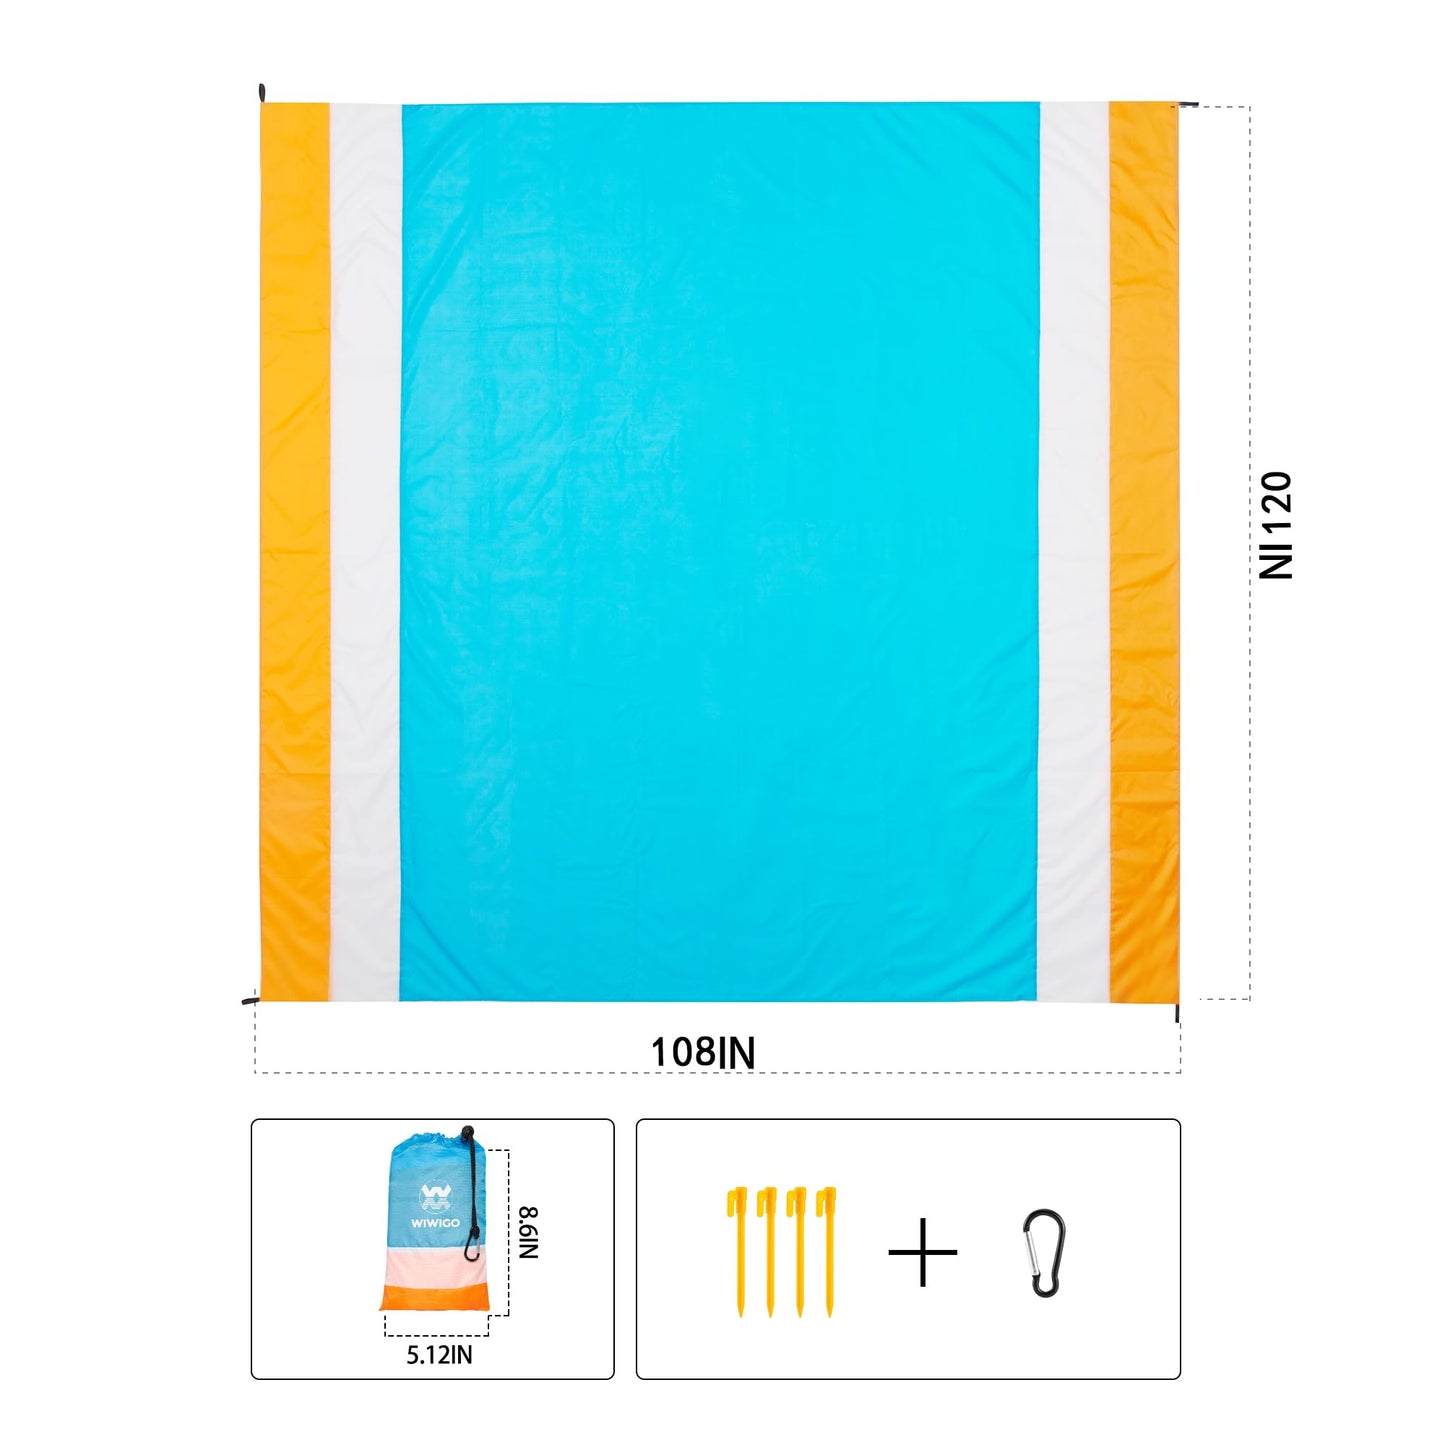 Beach Blanket Waterproof Sandproof Beach Mat 79" X 83" /10'x9'for 2-8 Adults Quick Drying Outdoor Picnic Mat Beach Accessories for Travel, Camping, Hiking